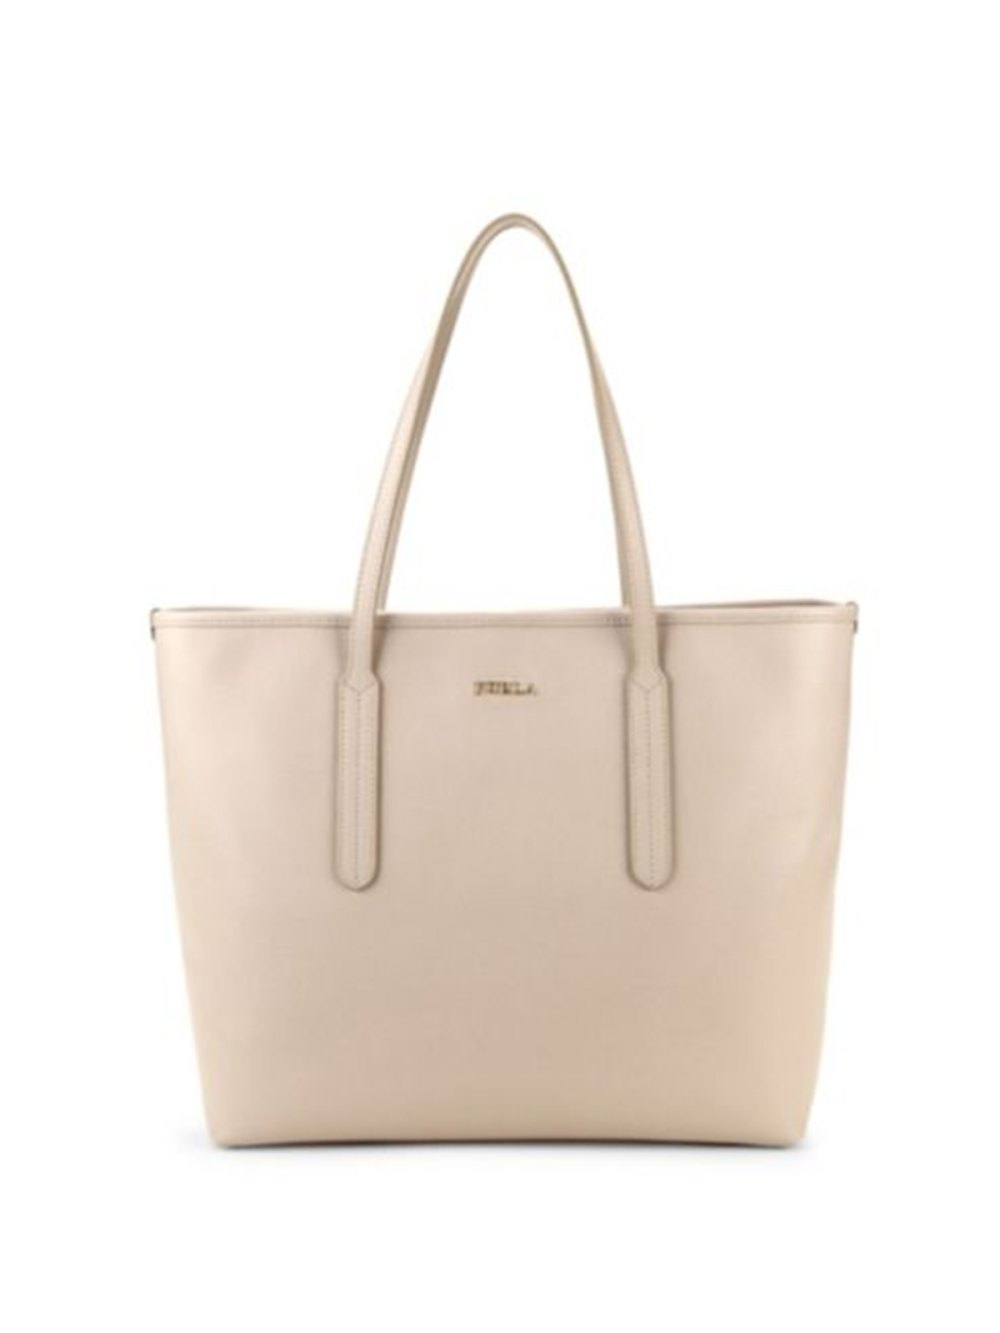 This Furla Tote Bag Is 54% Off and We Can’t Stop Freaking Out | Us Weekly